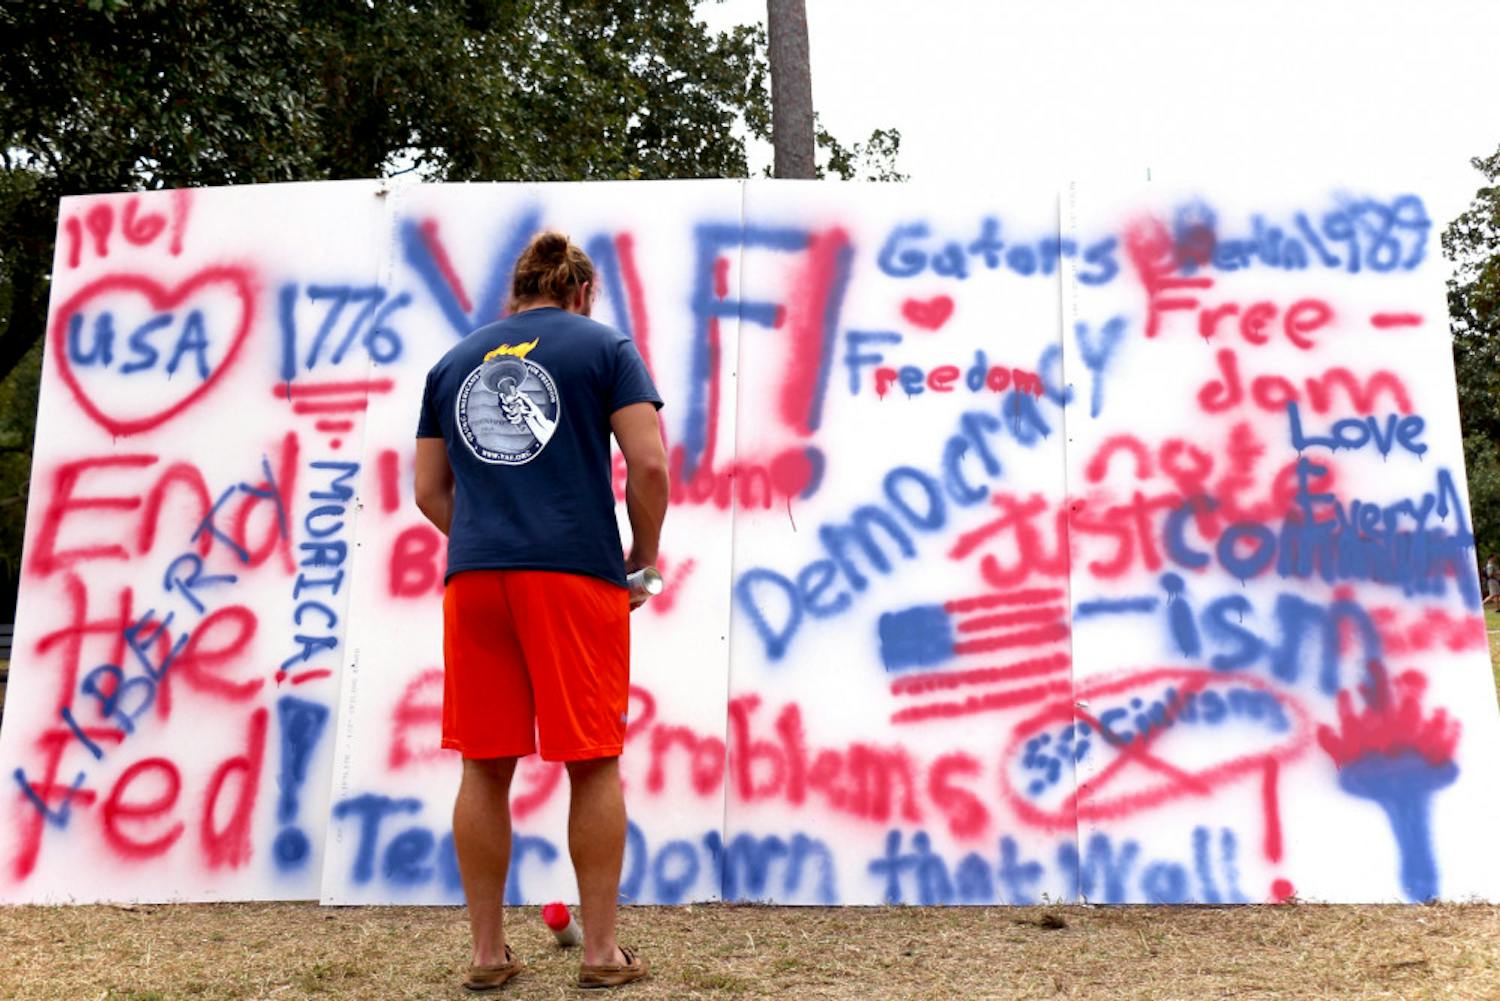 Daniel Weldon, a 20-year-old UF political science sophomore and the president of Young Americans for Freedom, stands in front of a commemorative wall for the anniversary of the fall of the Berlin Wall on the Plaza of the Americas on Wednesday afternoon. Weldon said the event celebrated the triumph of freedom from socialism.